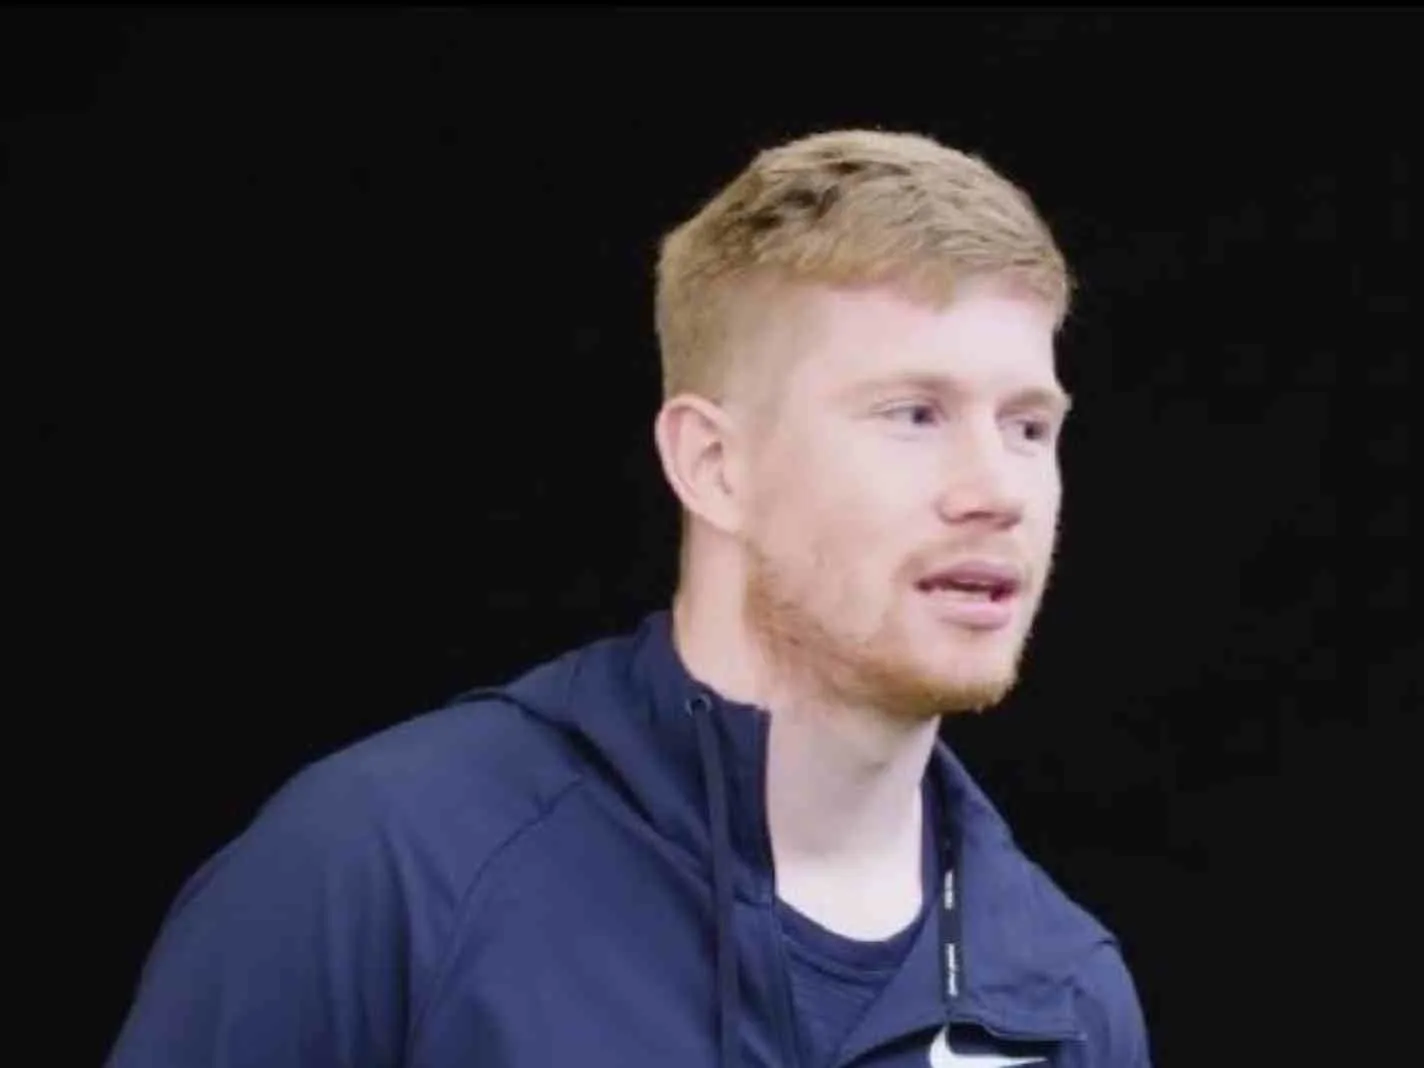 The photo shows Kevin De Bruyne during his interview with Wow Hydrate.